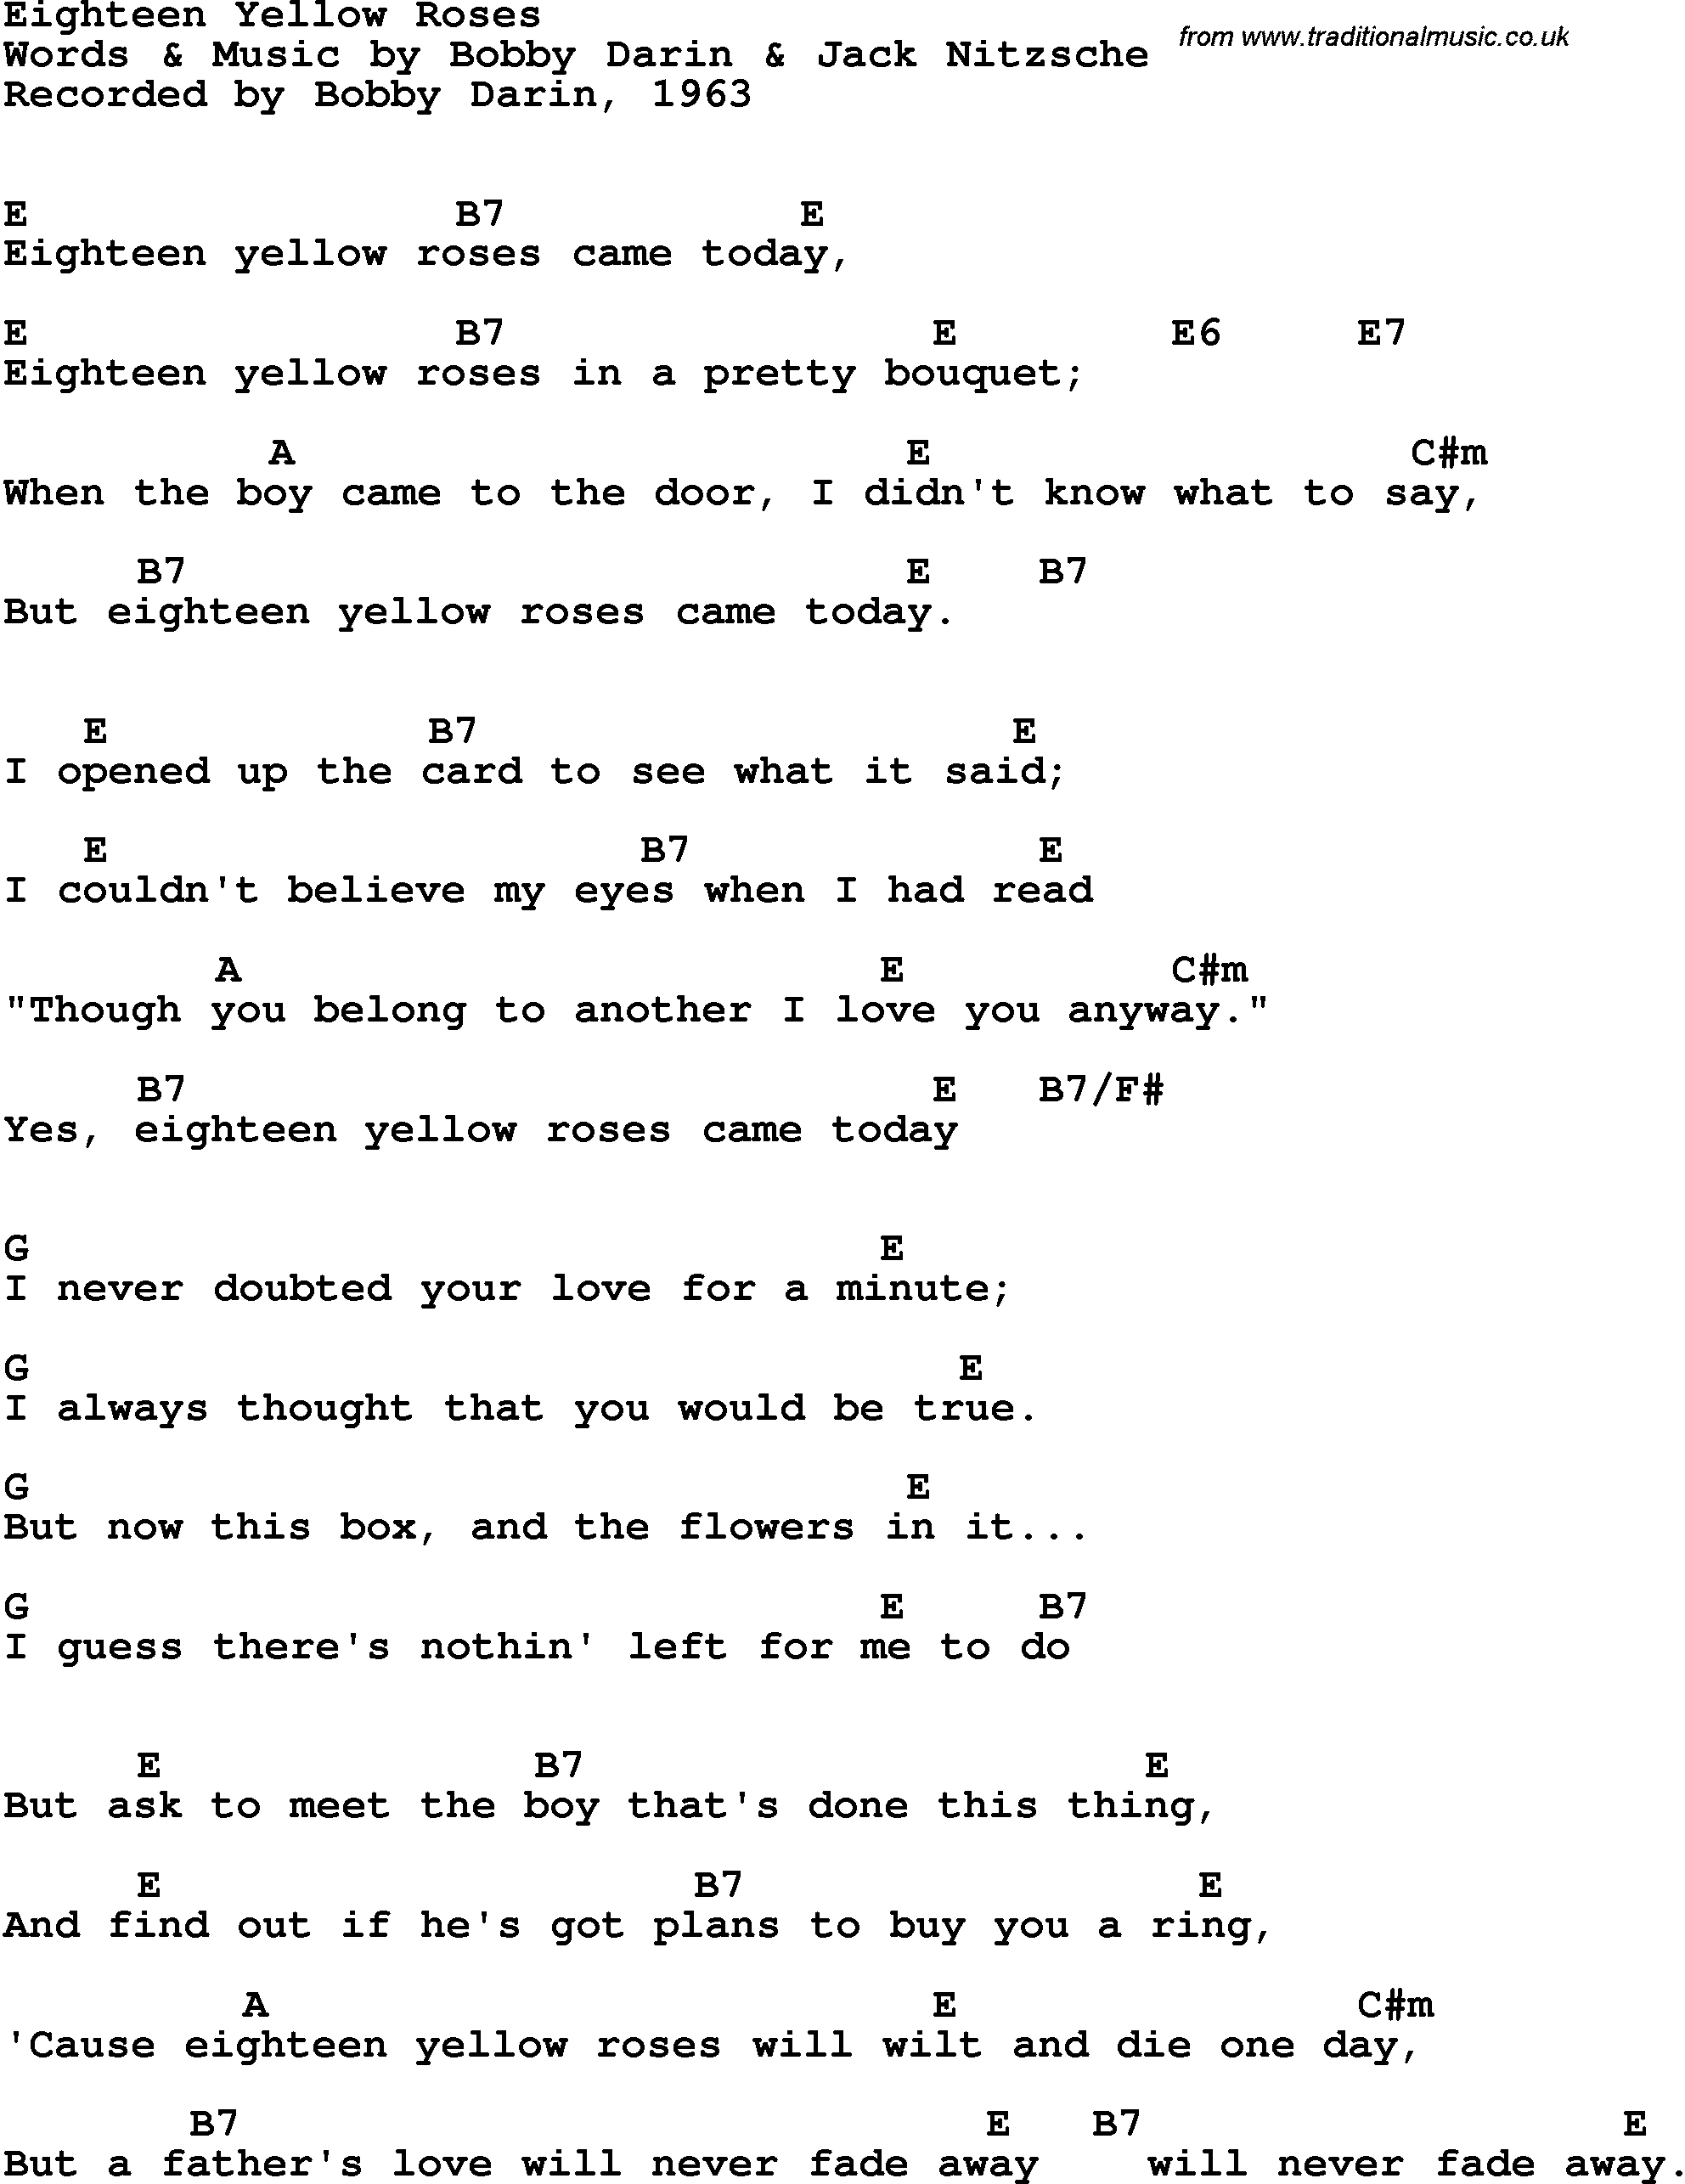 Song Lyrics with guitar chords for Eighteen Yellow Roses - Bobby Darin, 1963